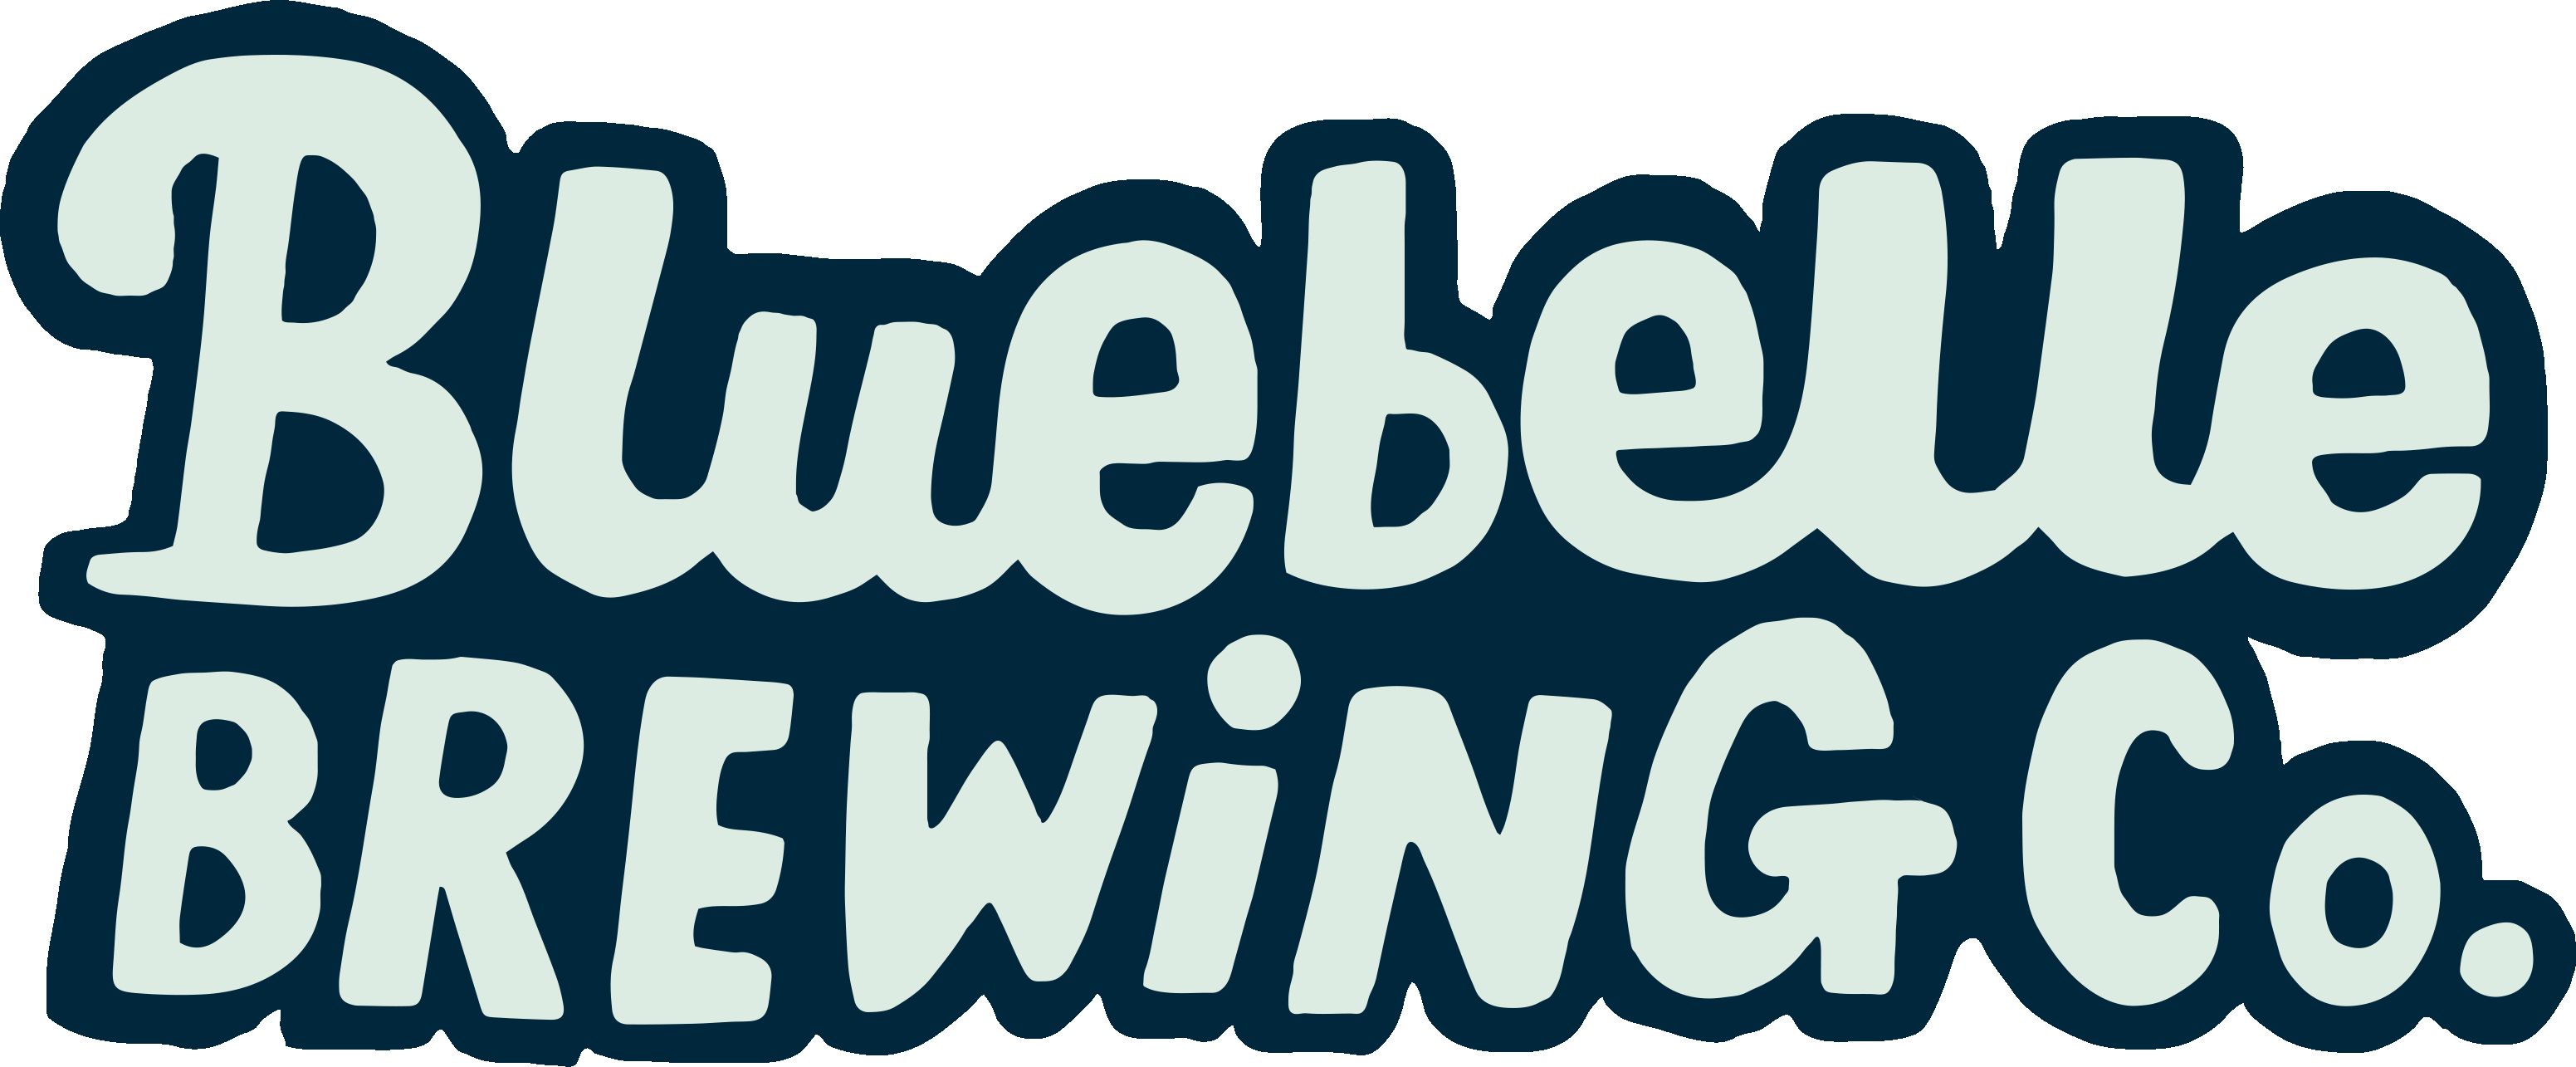 Bluebelle Brewing Co.